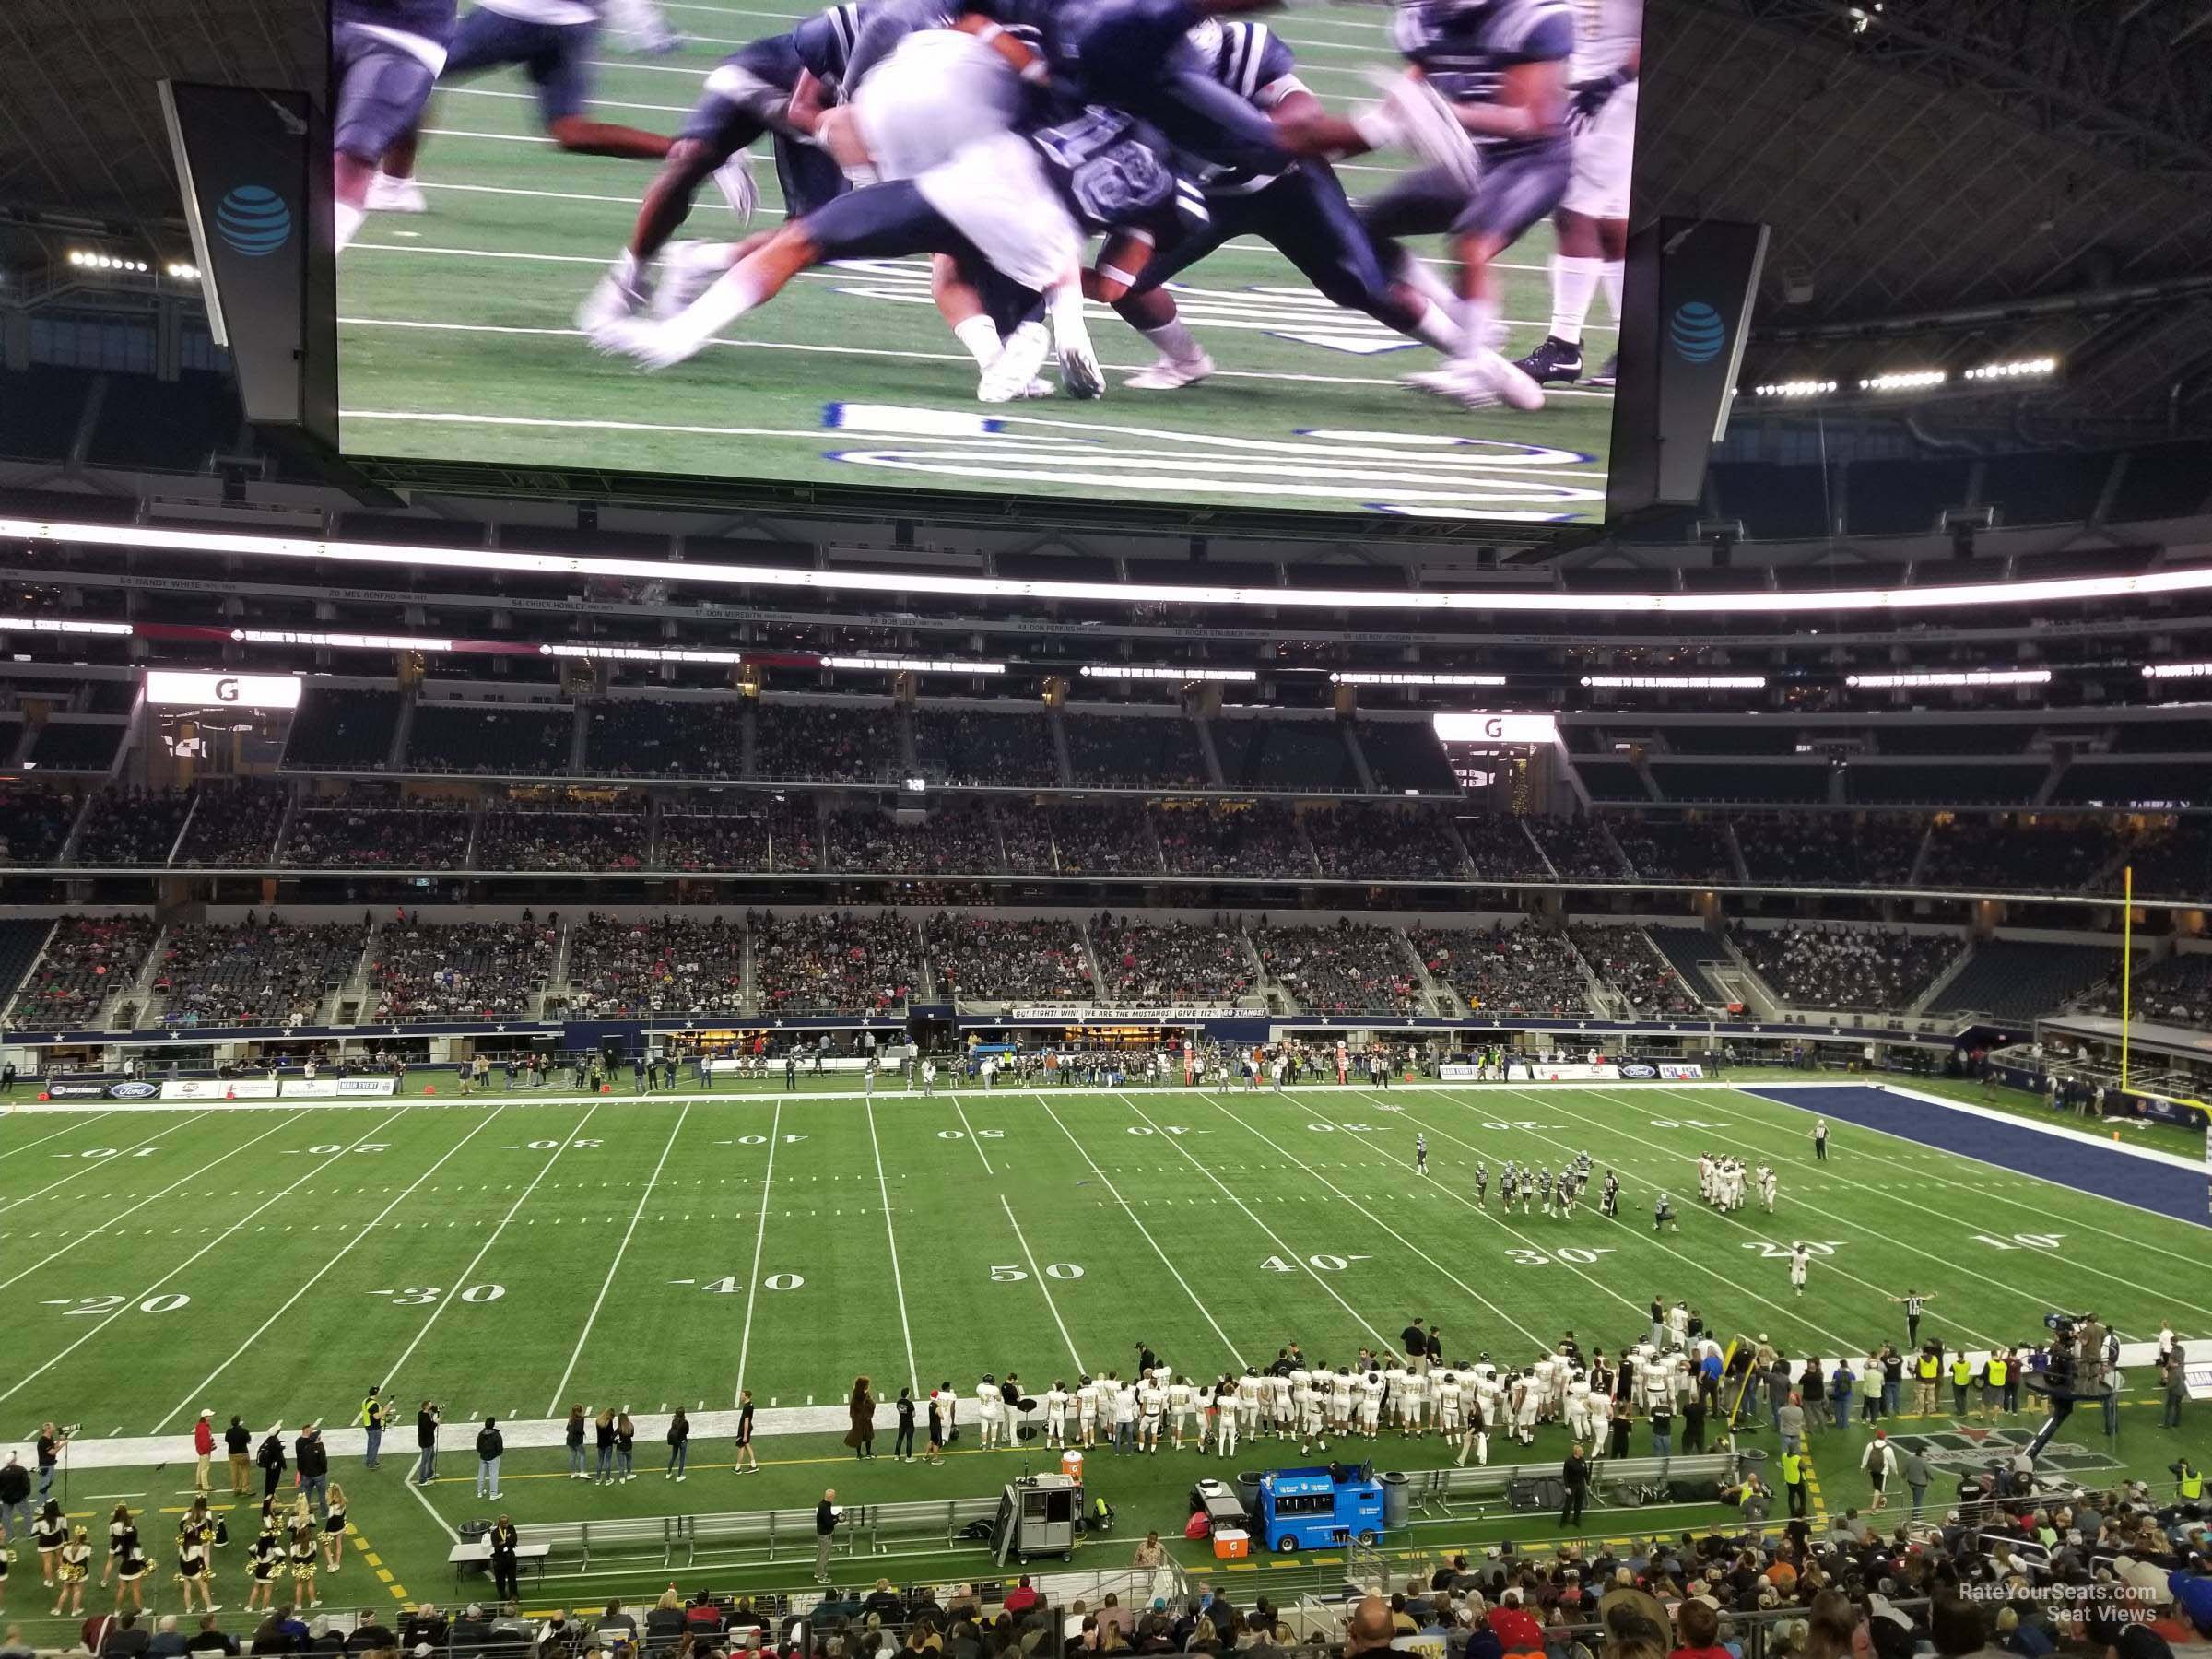 section c235, row 10 seat view  for football - at&t stadium (cowboys stadium)